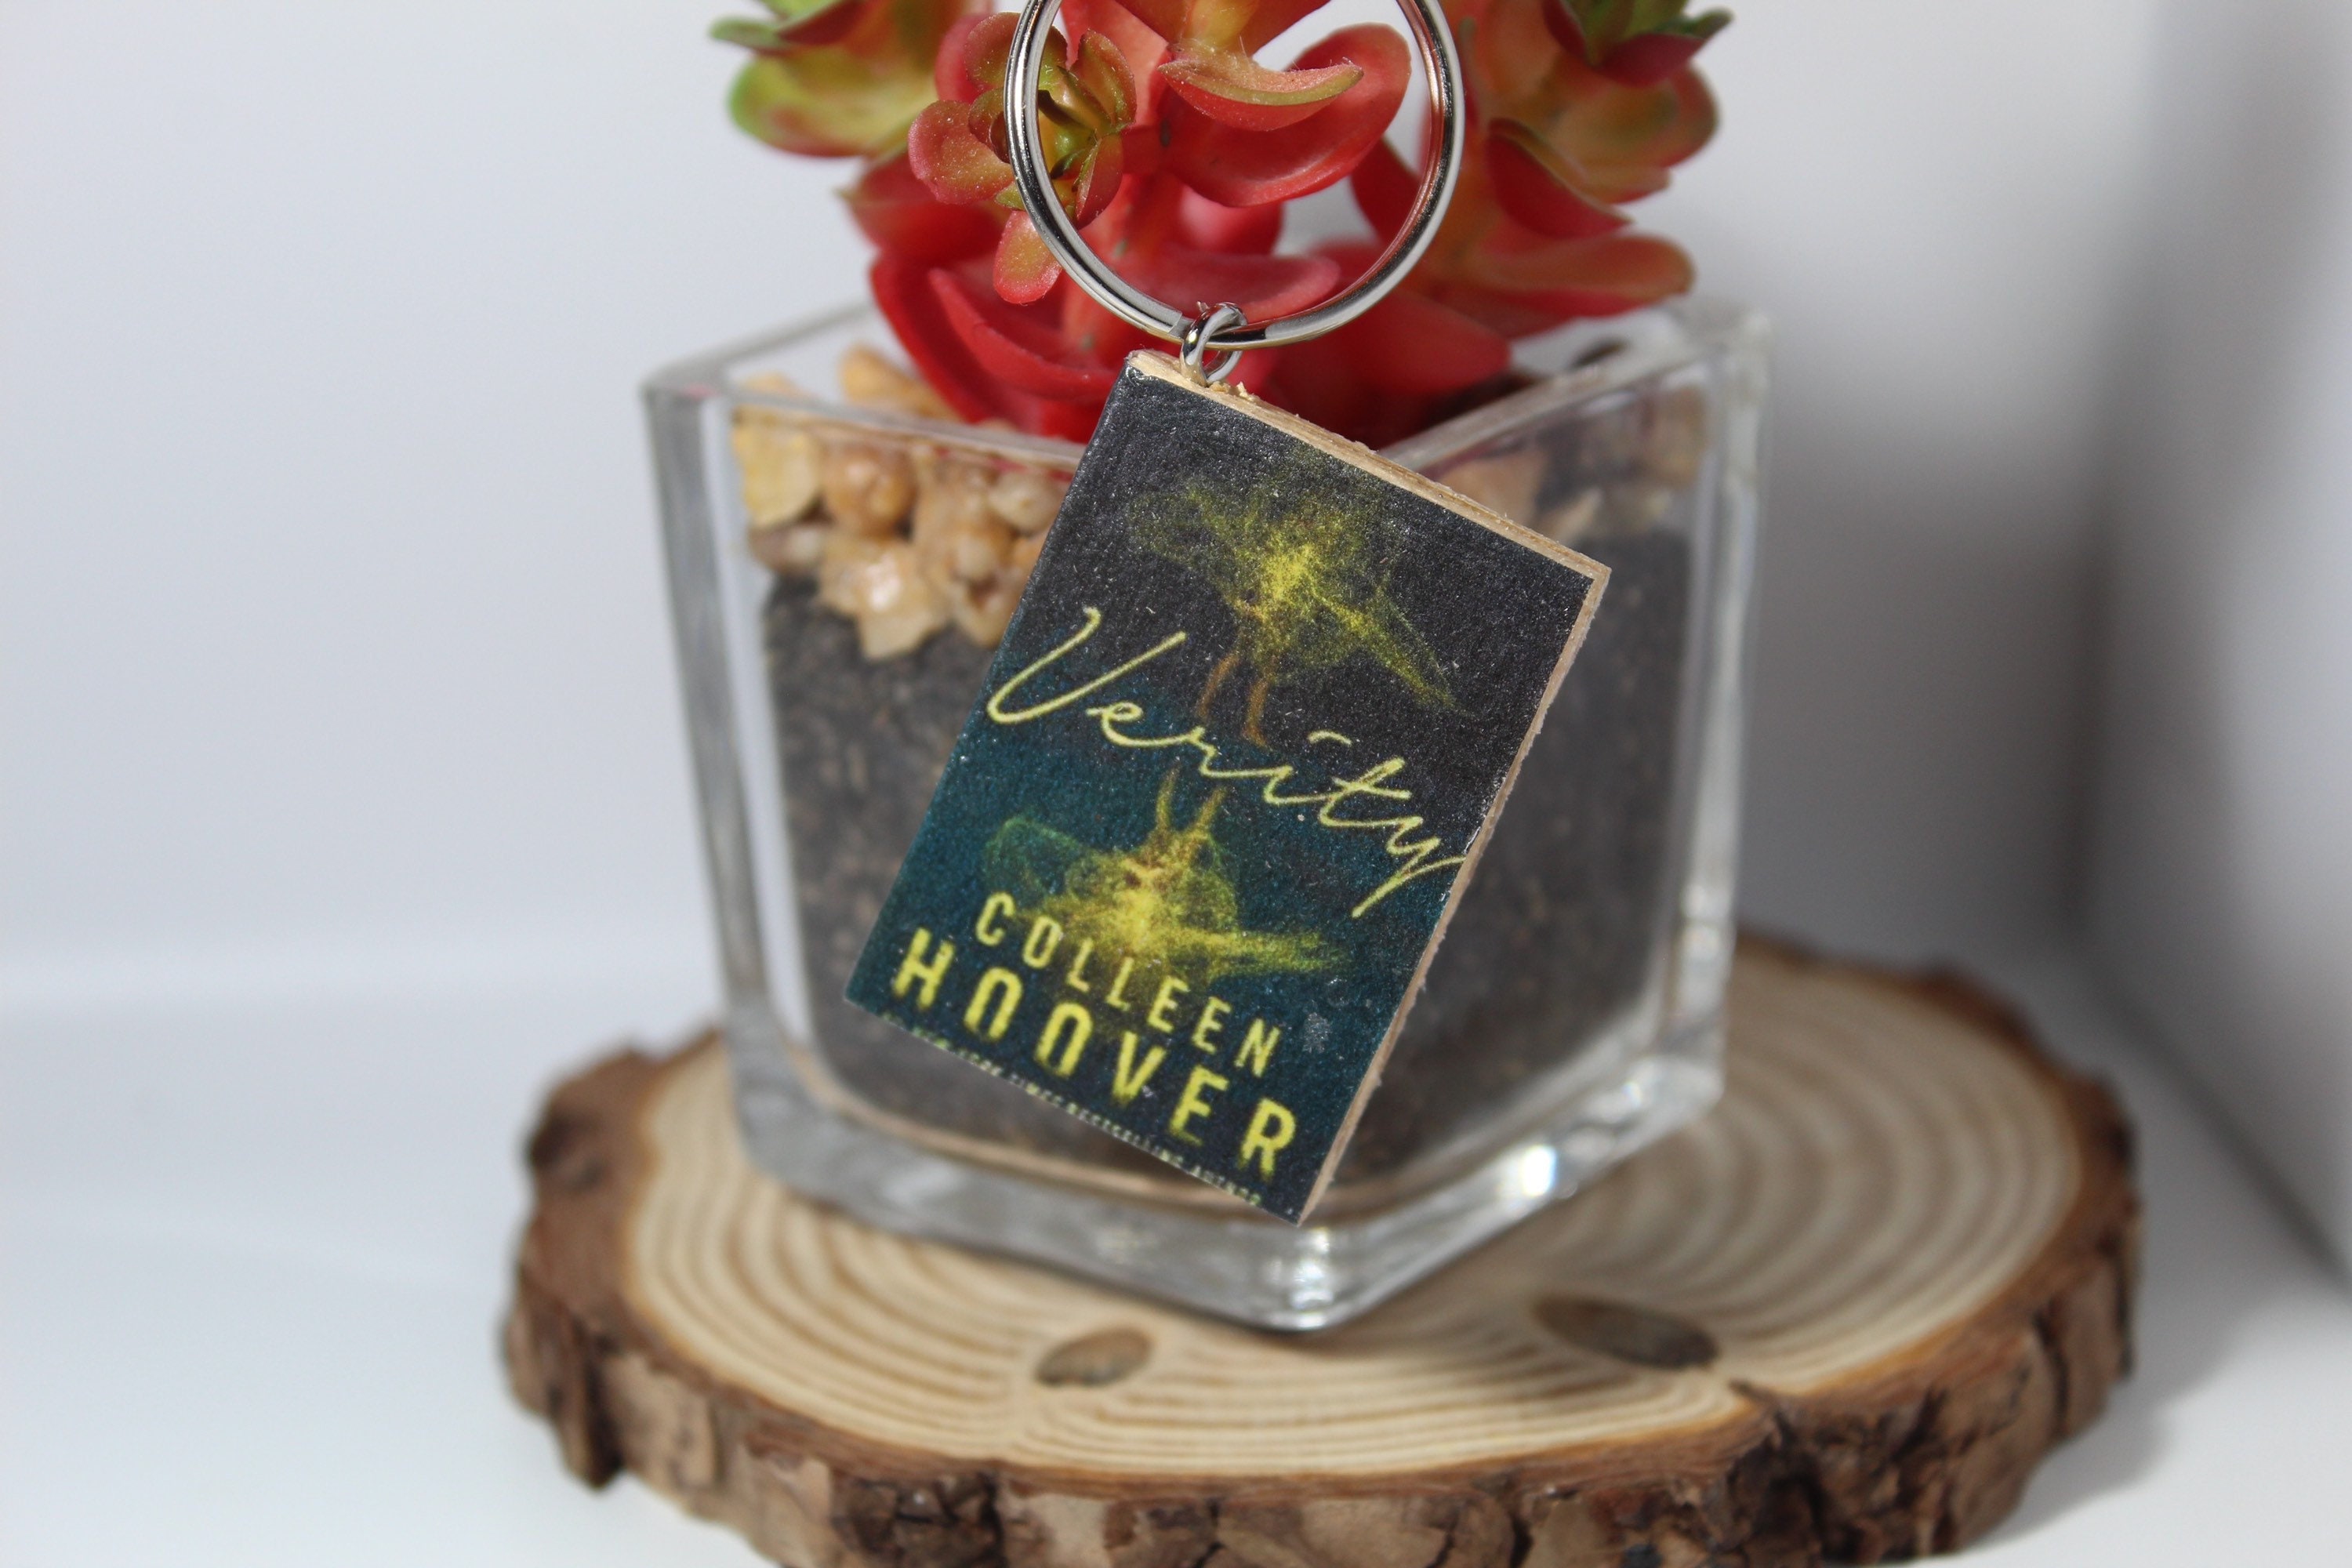 Colleen Hoover book keychain